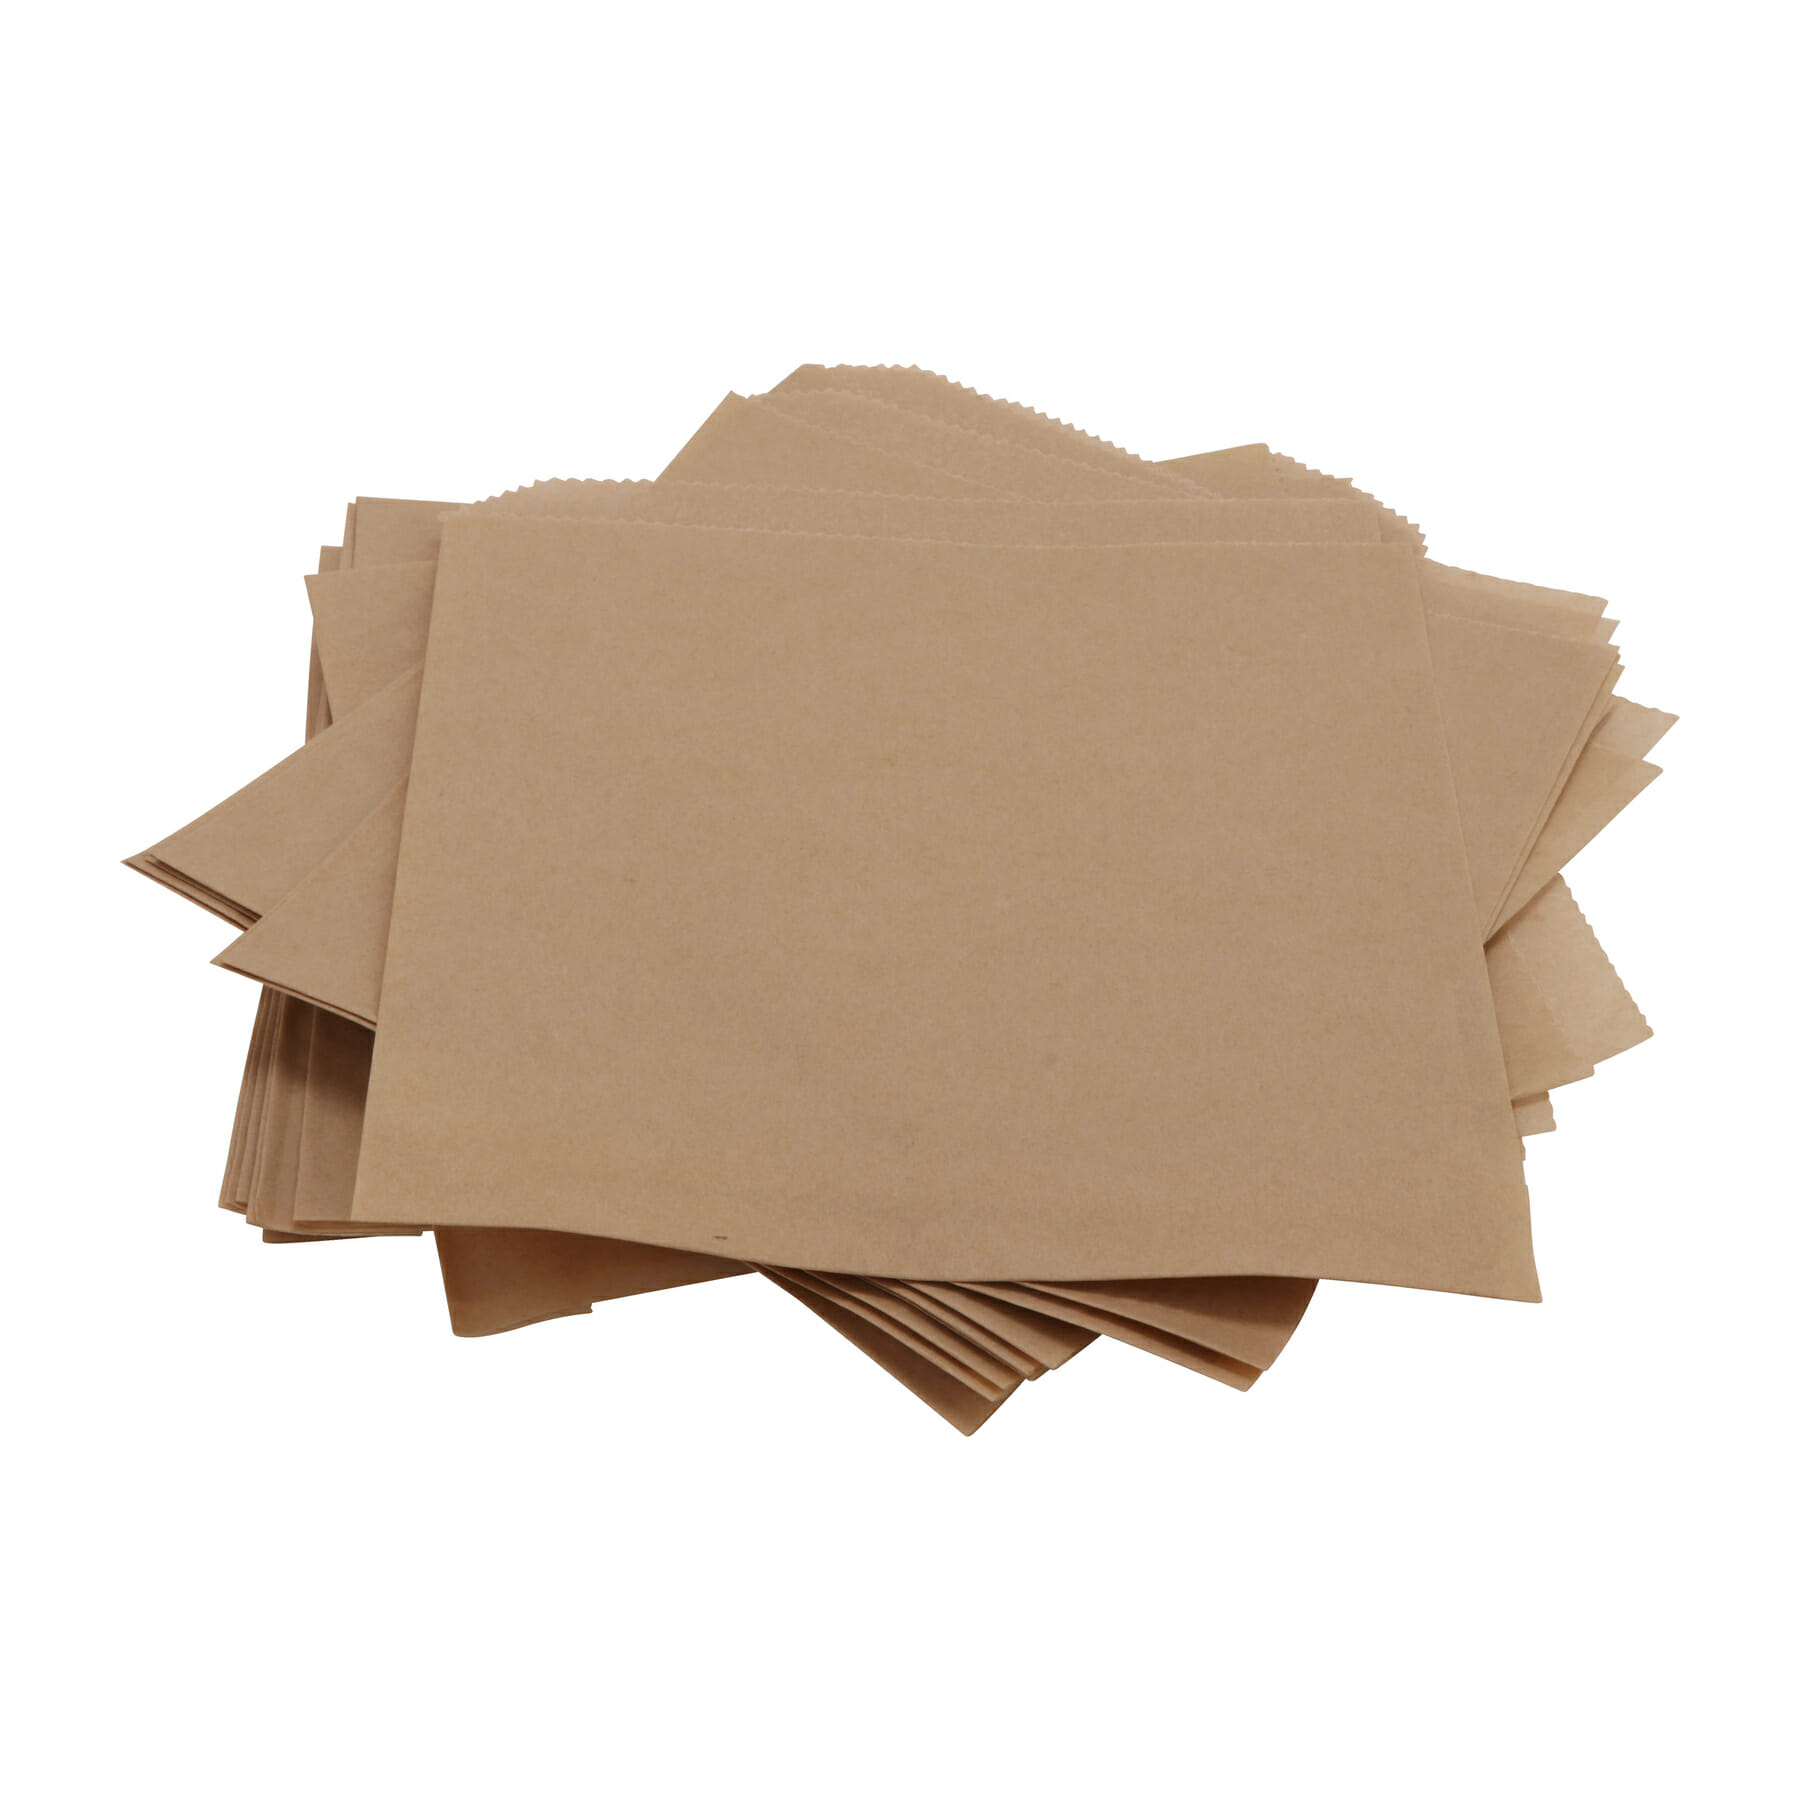 Sandwich 6.75 inch Waxed Paper Bags 100 pieces